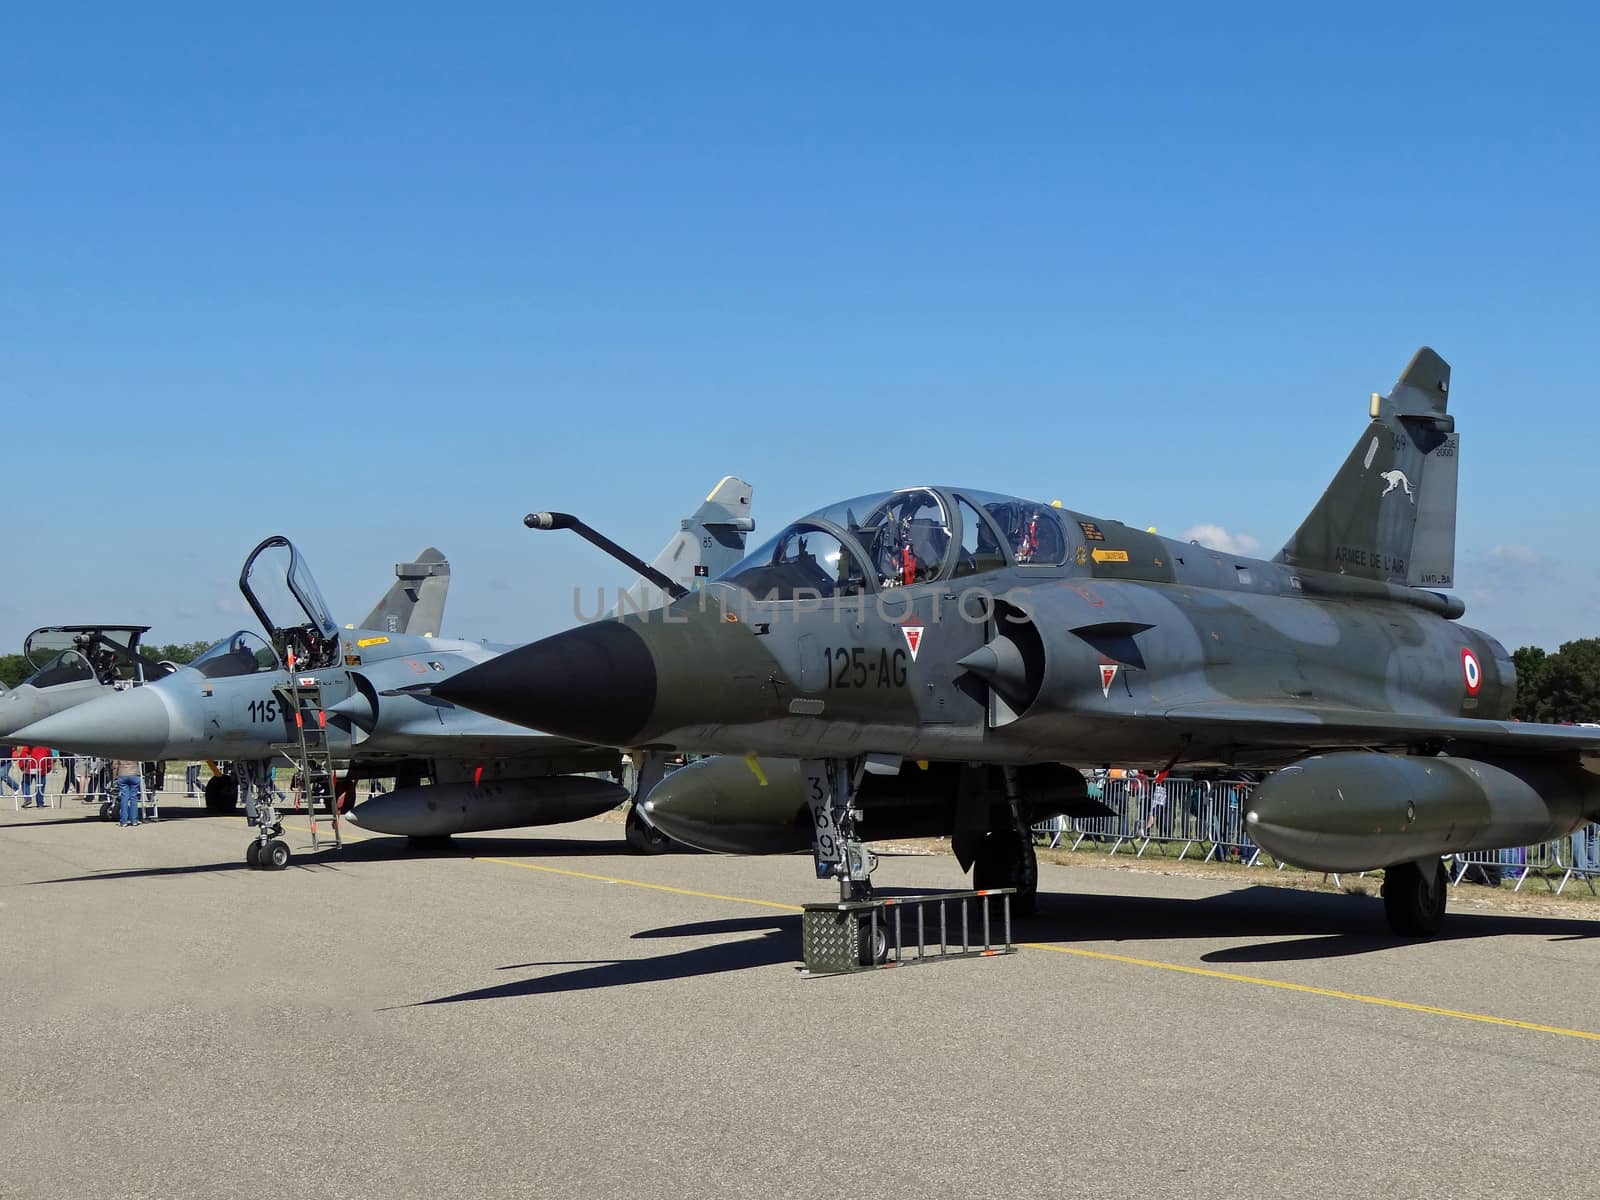 mirage 2000N at an airshow in france